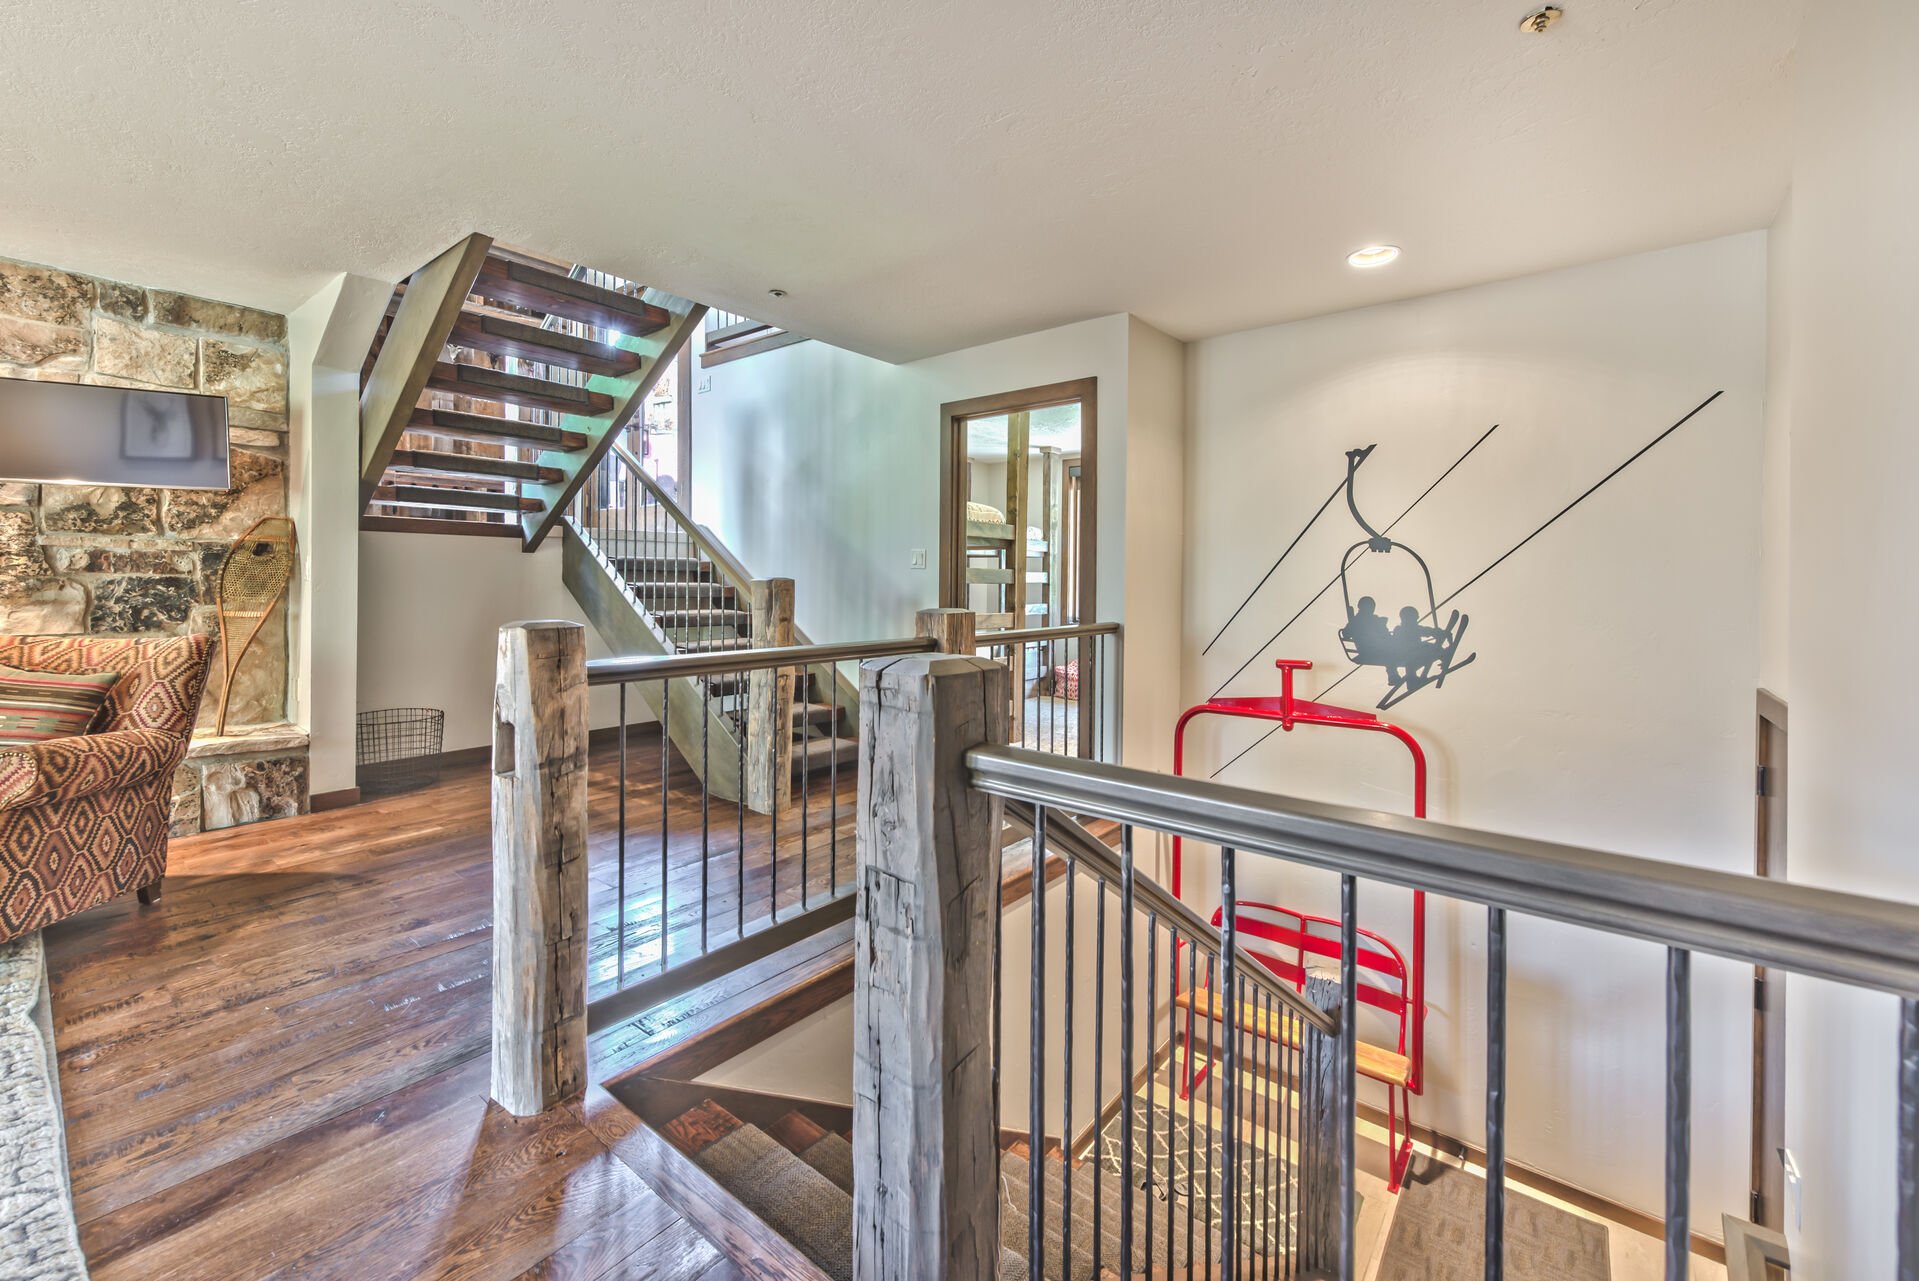 Stairway from Mid-Level to Lower Level Master Bedroom with Private Bath and Laundry Room